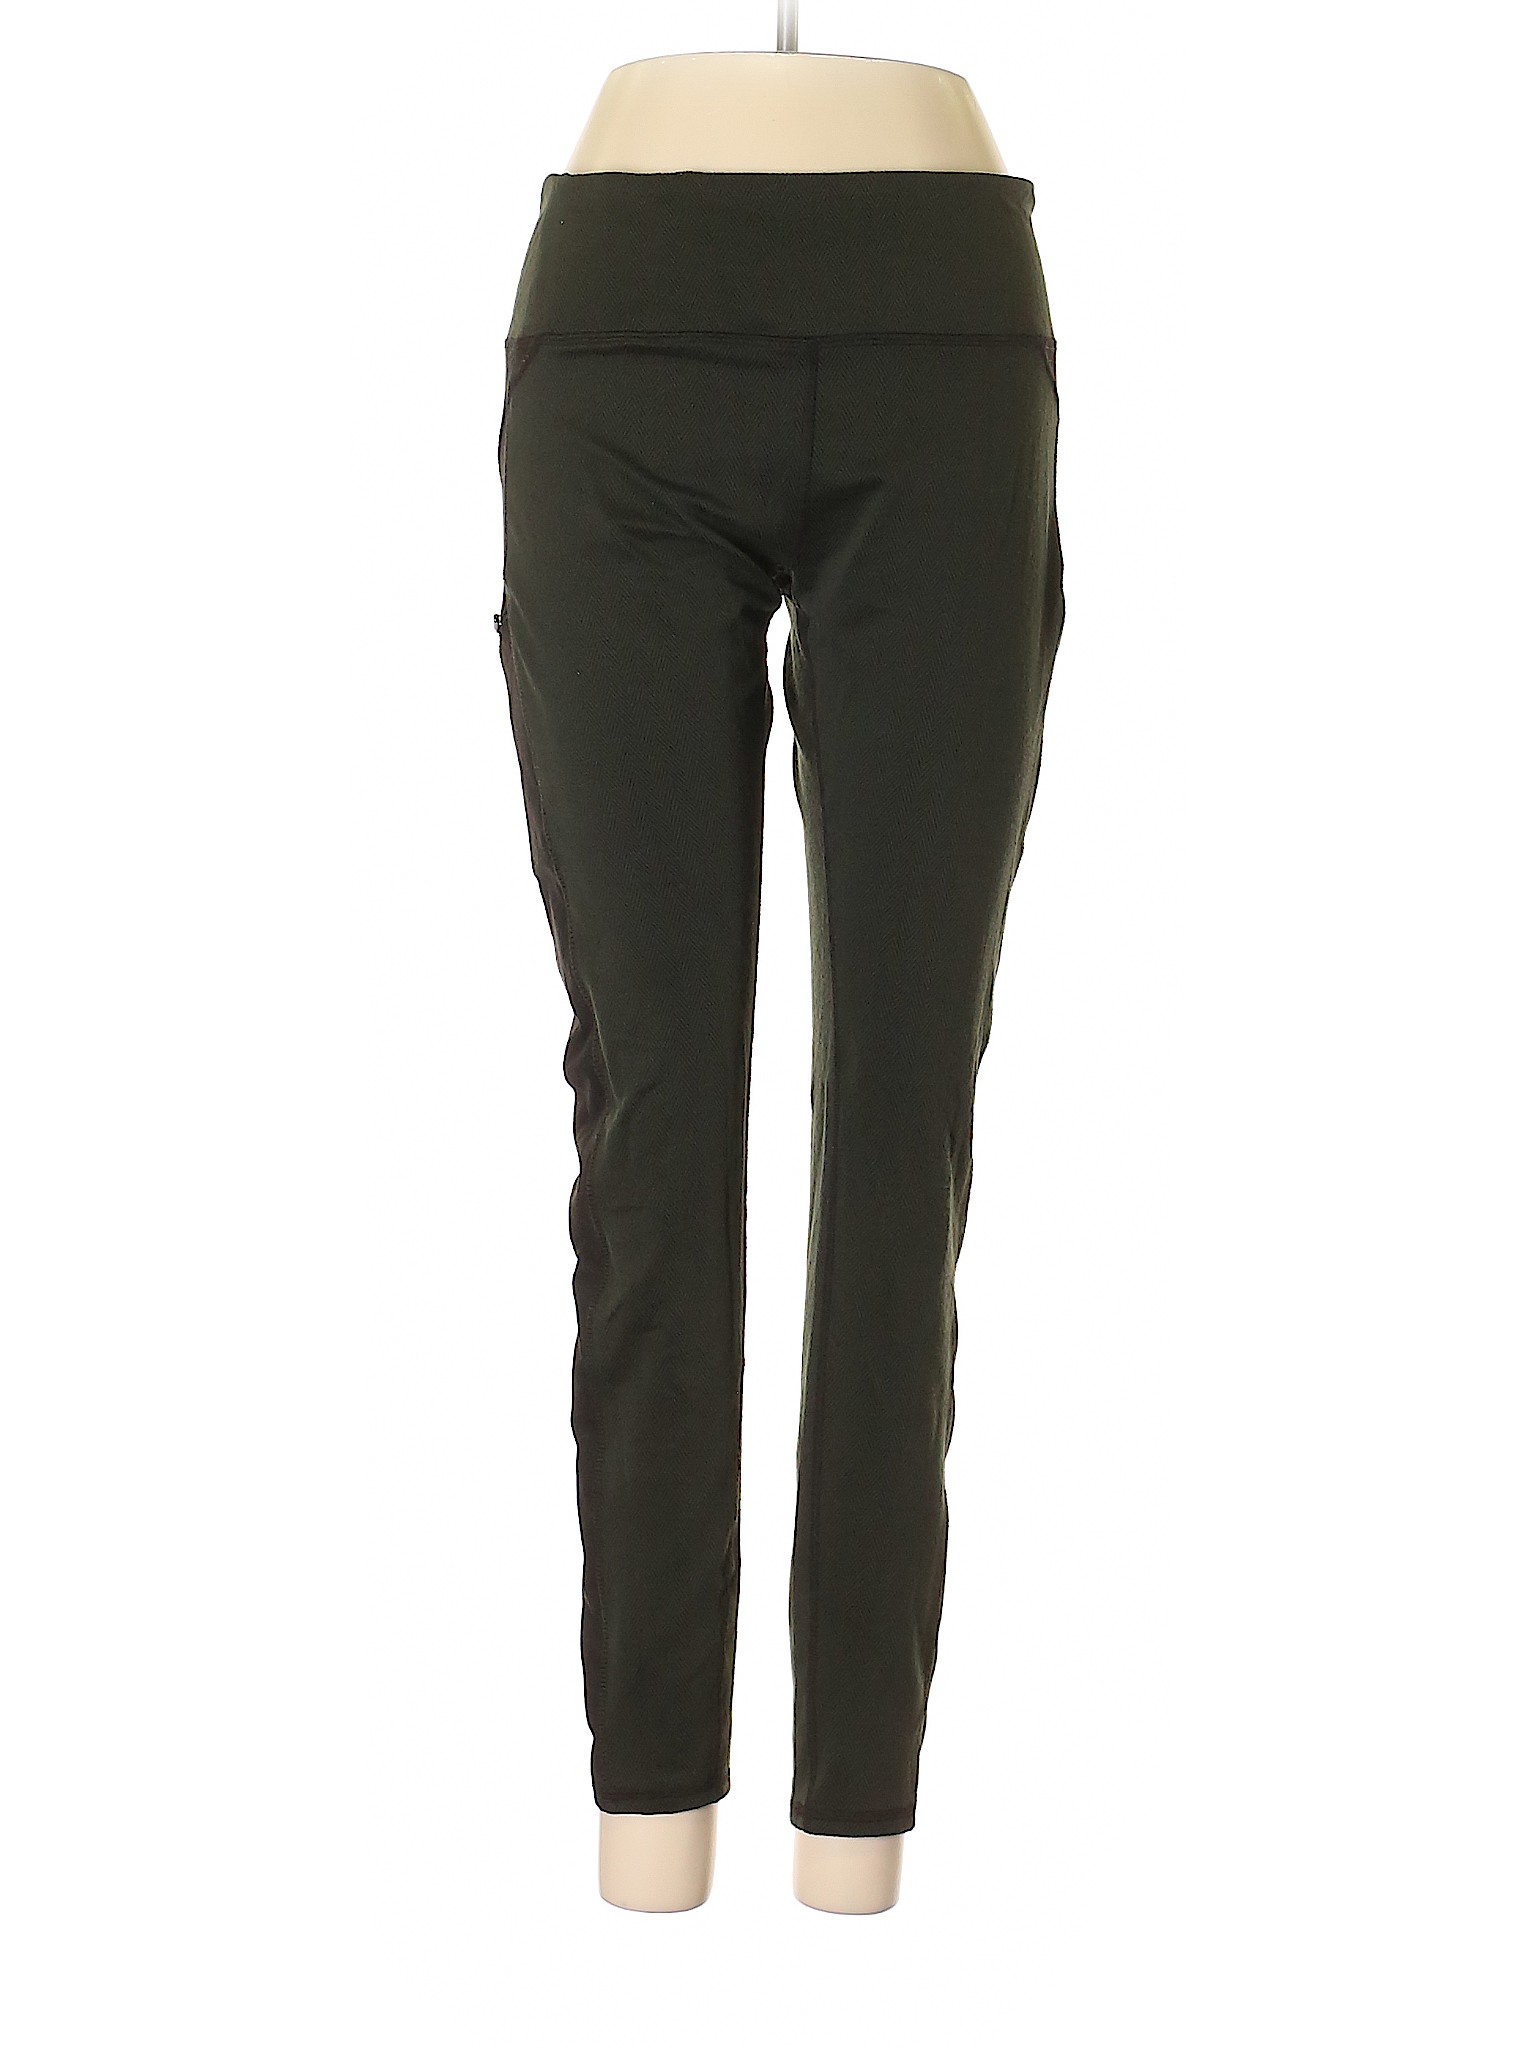 Z by Zobha Solid Dark Green Active Pants Size L - 59% off | thredUP